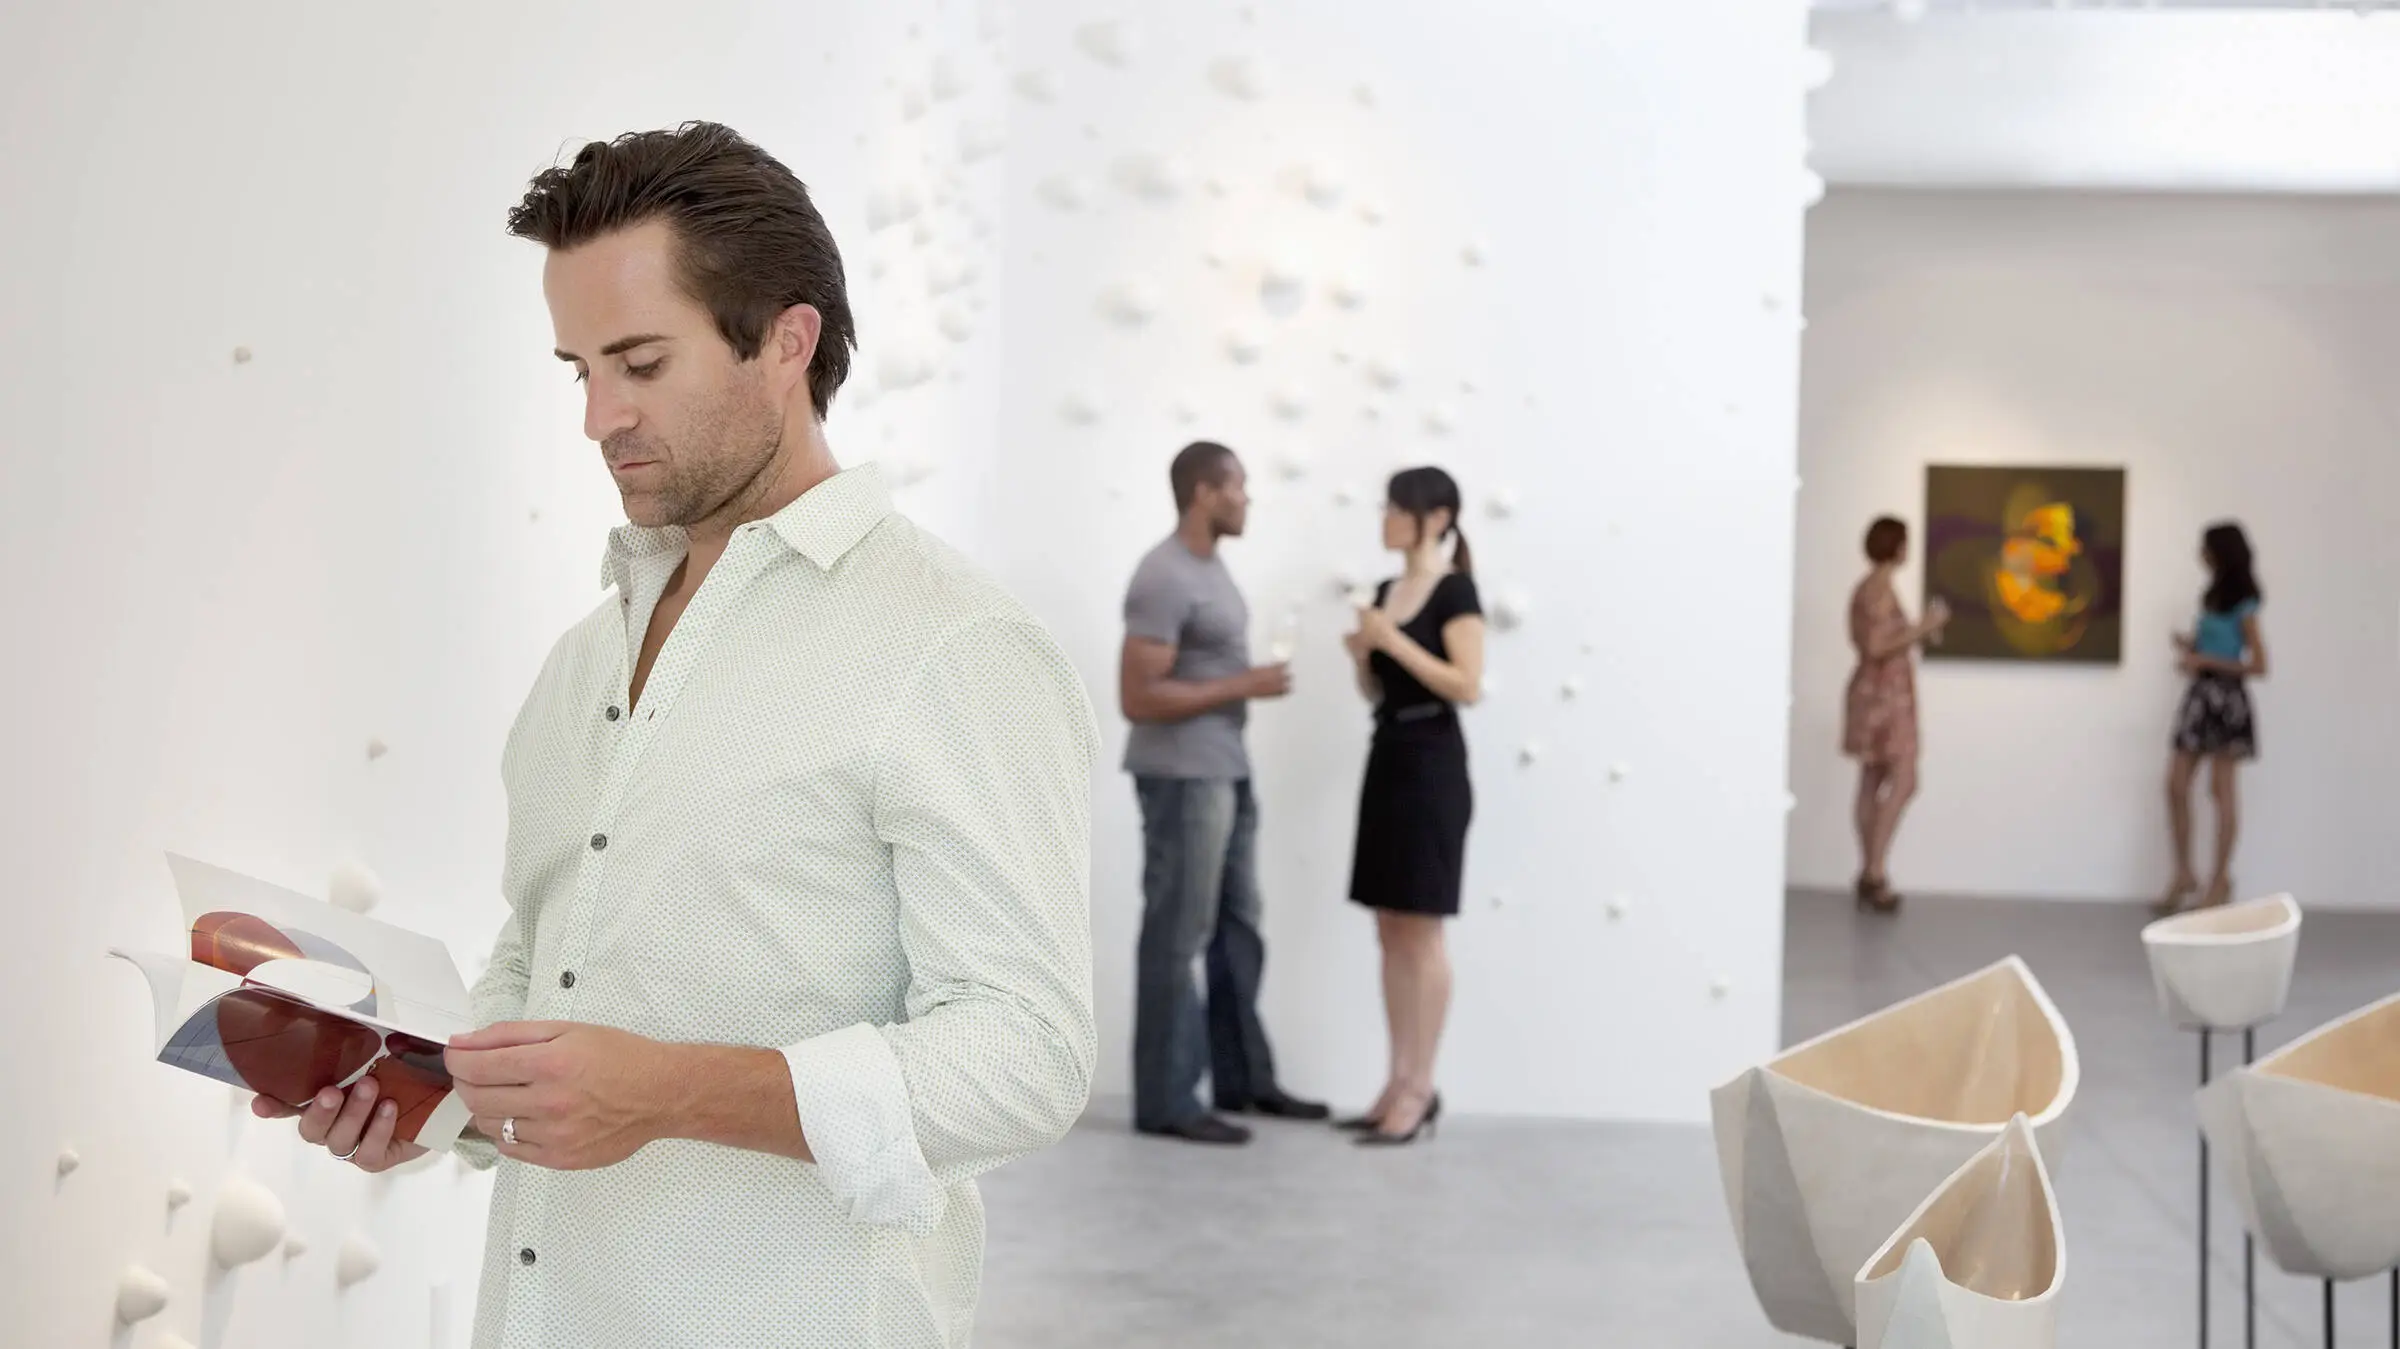 A man in a white shirt looks at a brochure in the museum and stands in front of a sculpture